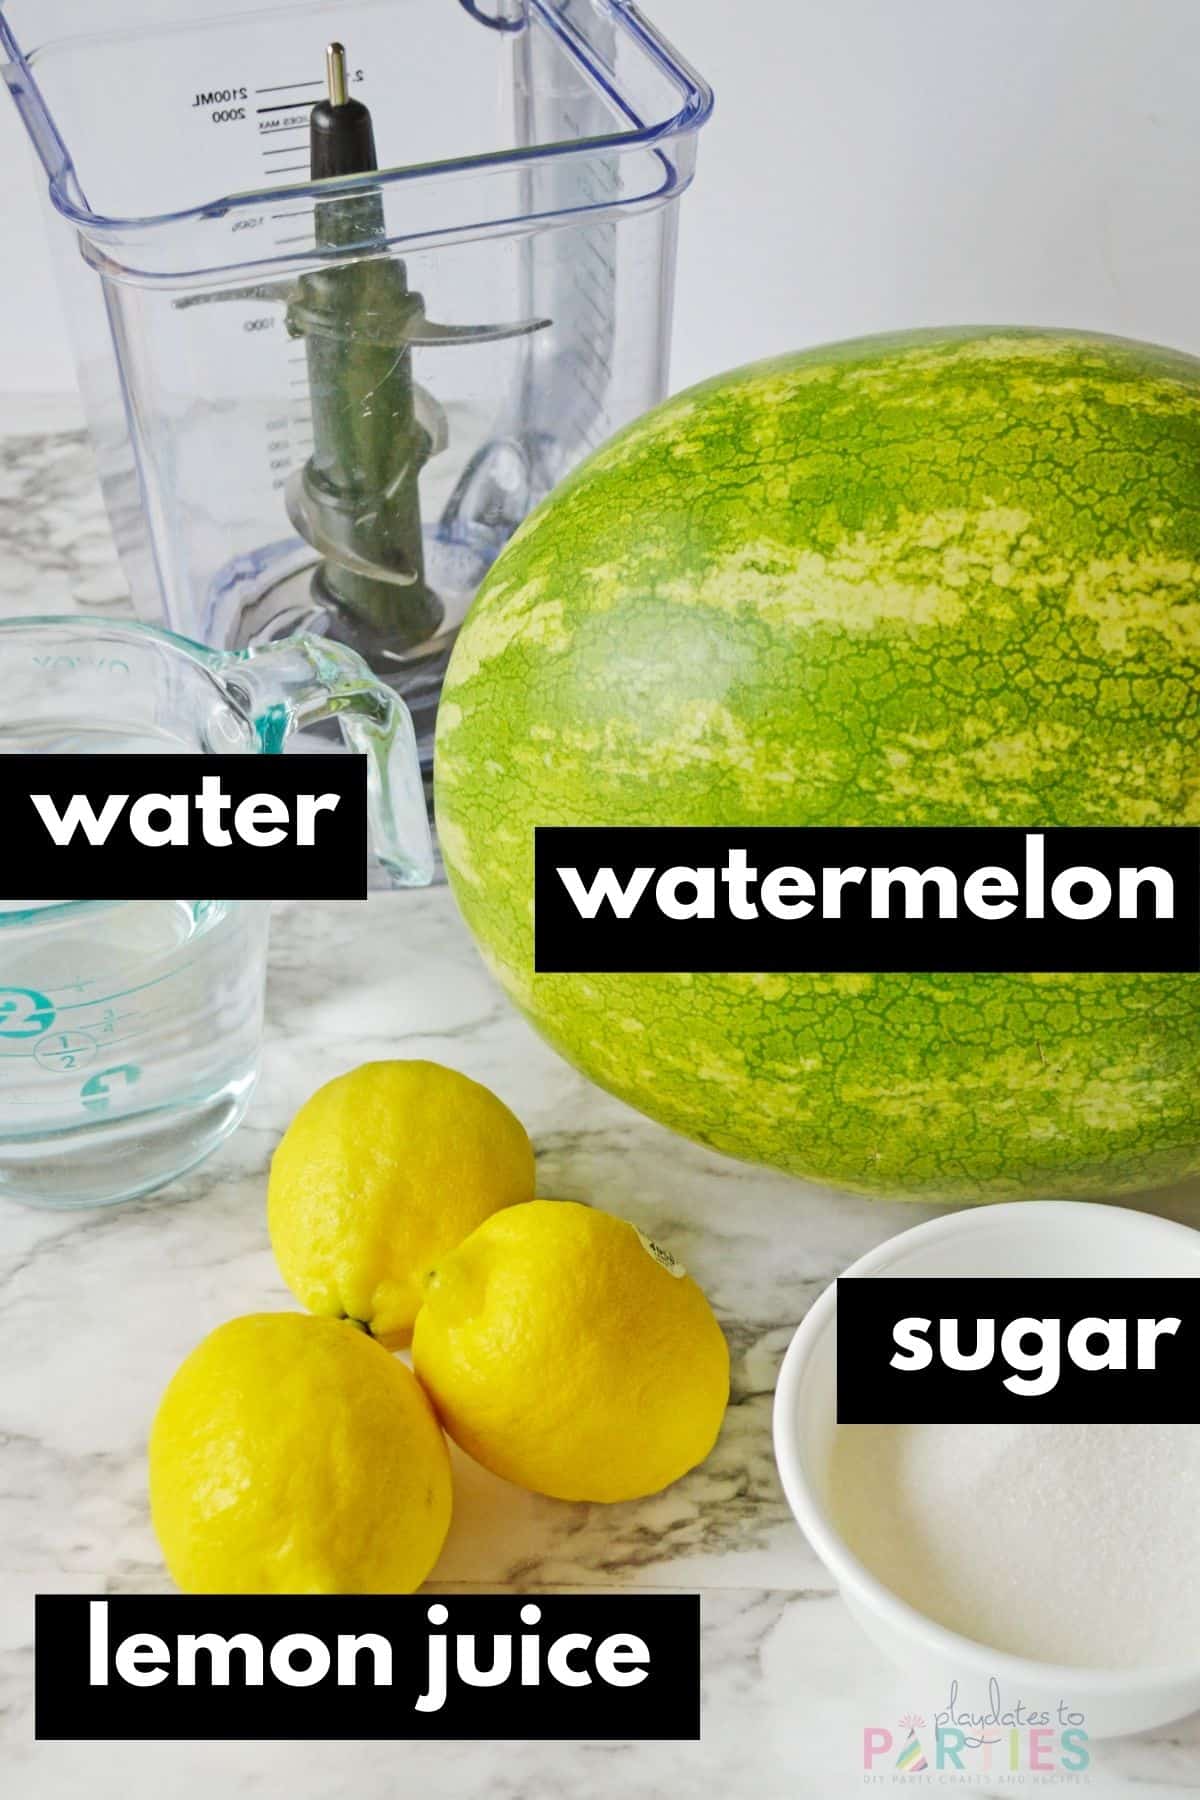 Ingredients on a marble counter, including watermelon, water, sugar, and lemon juice.